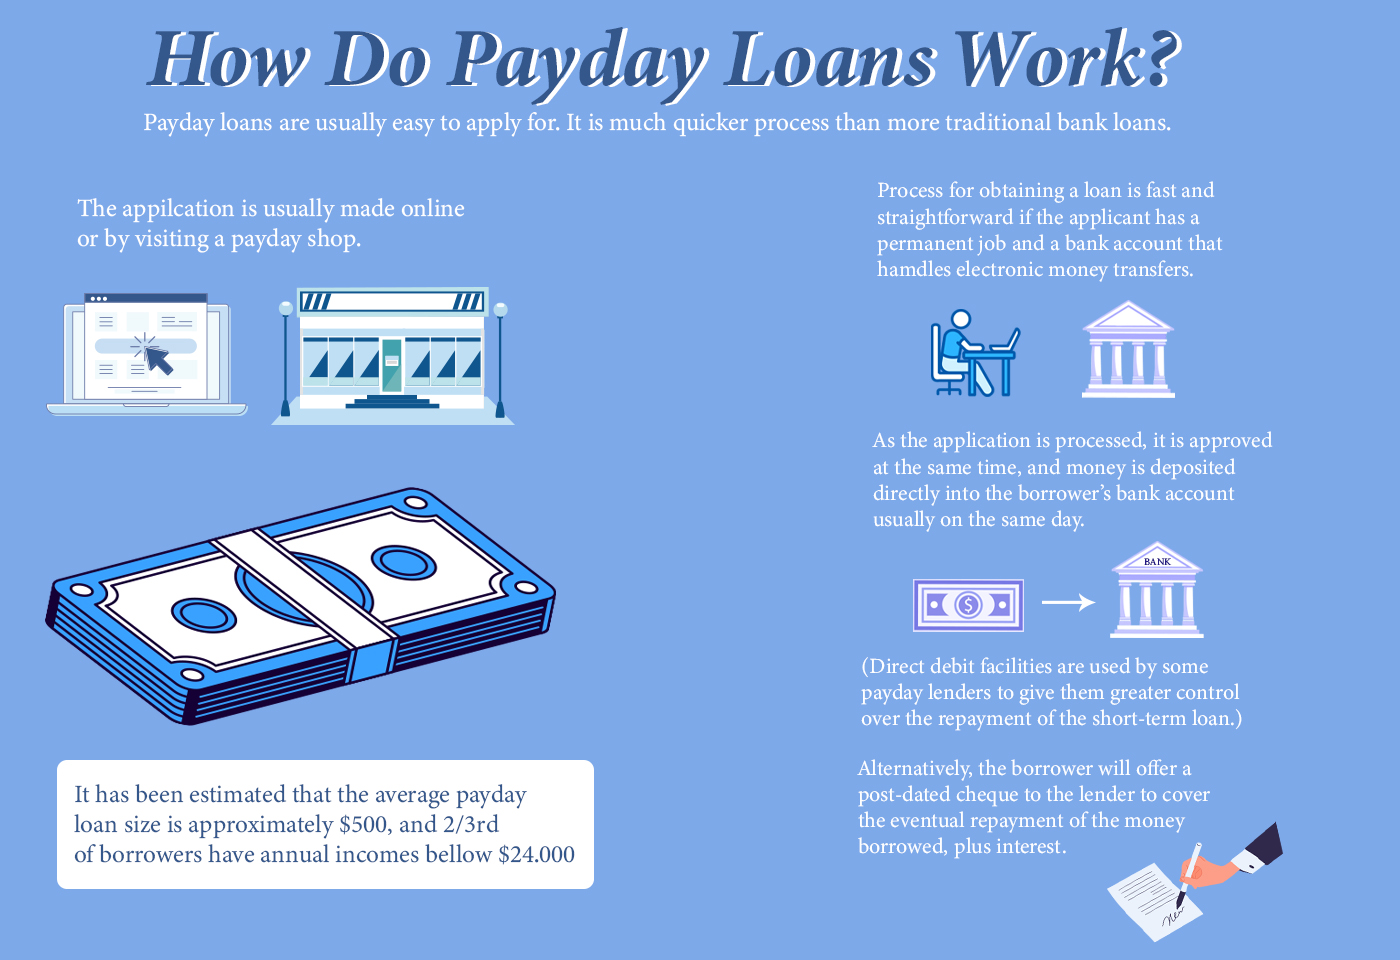 Why Are Payday Loans Helpful?